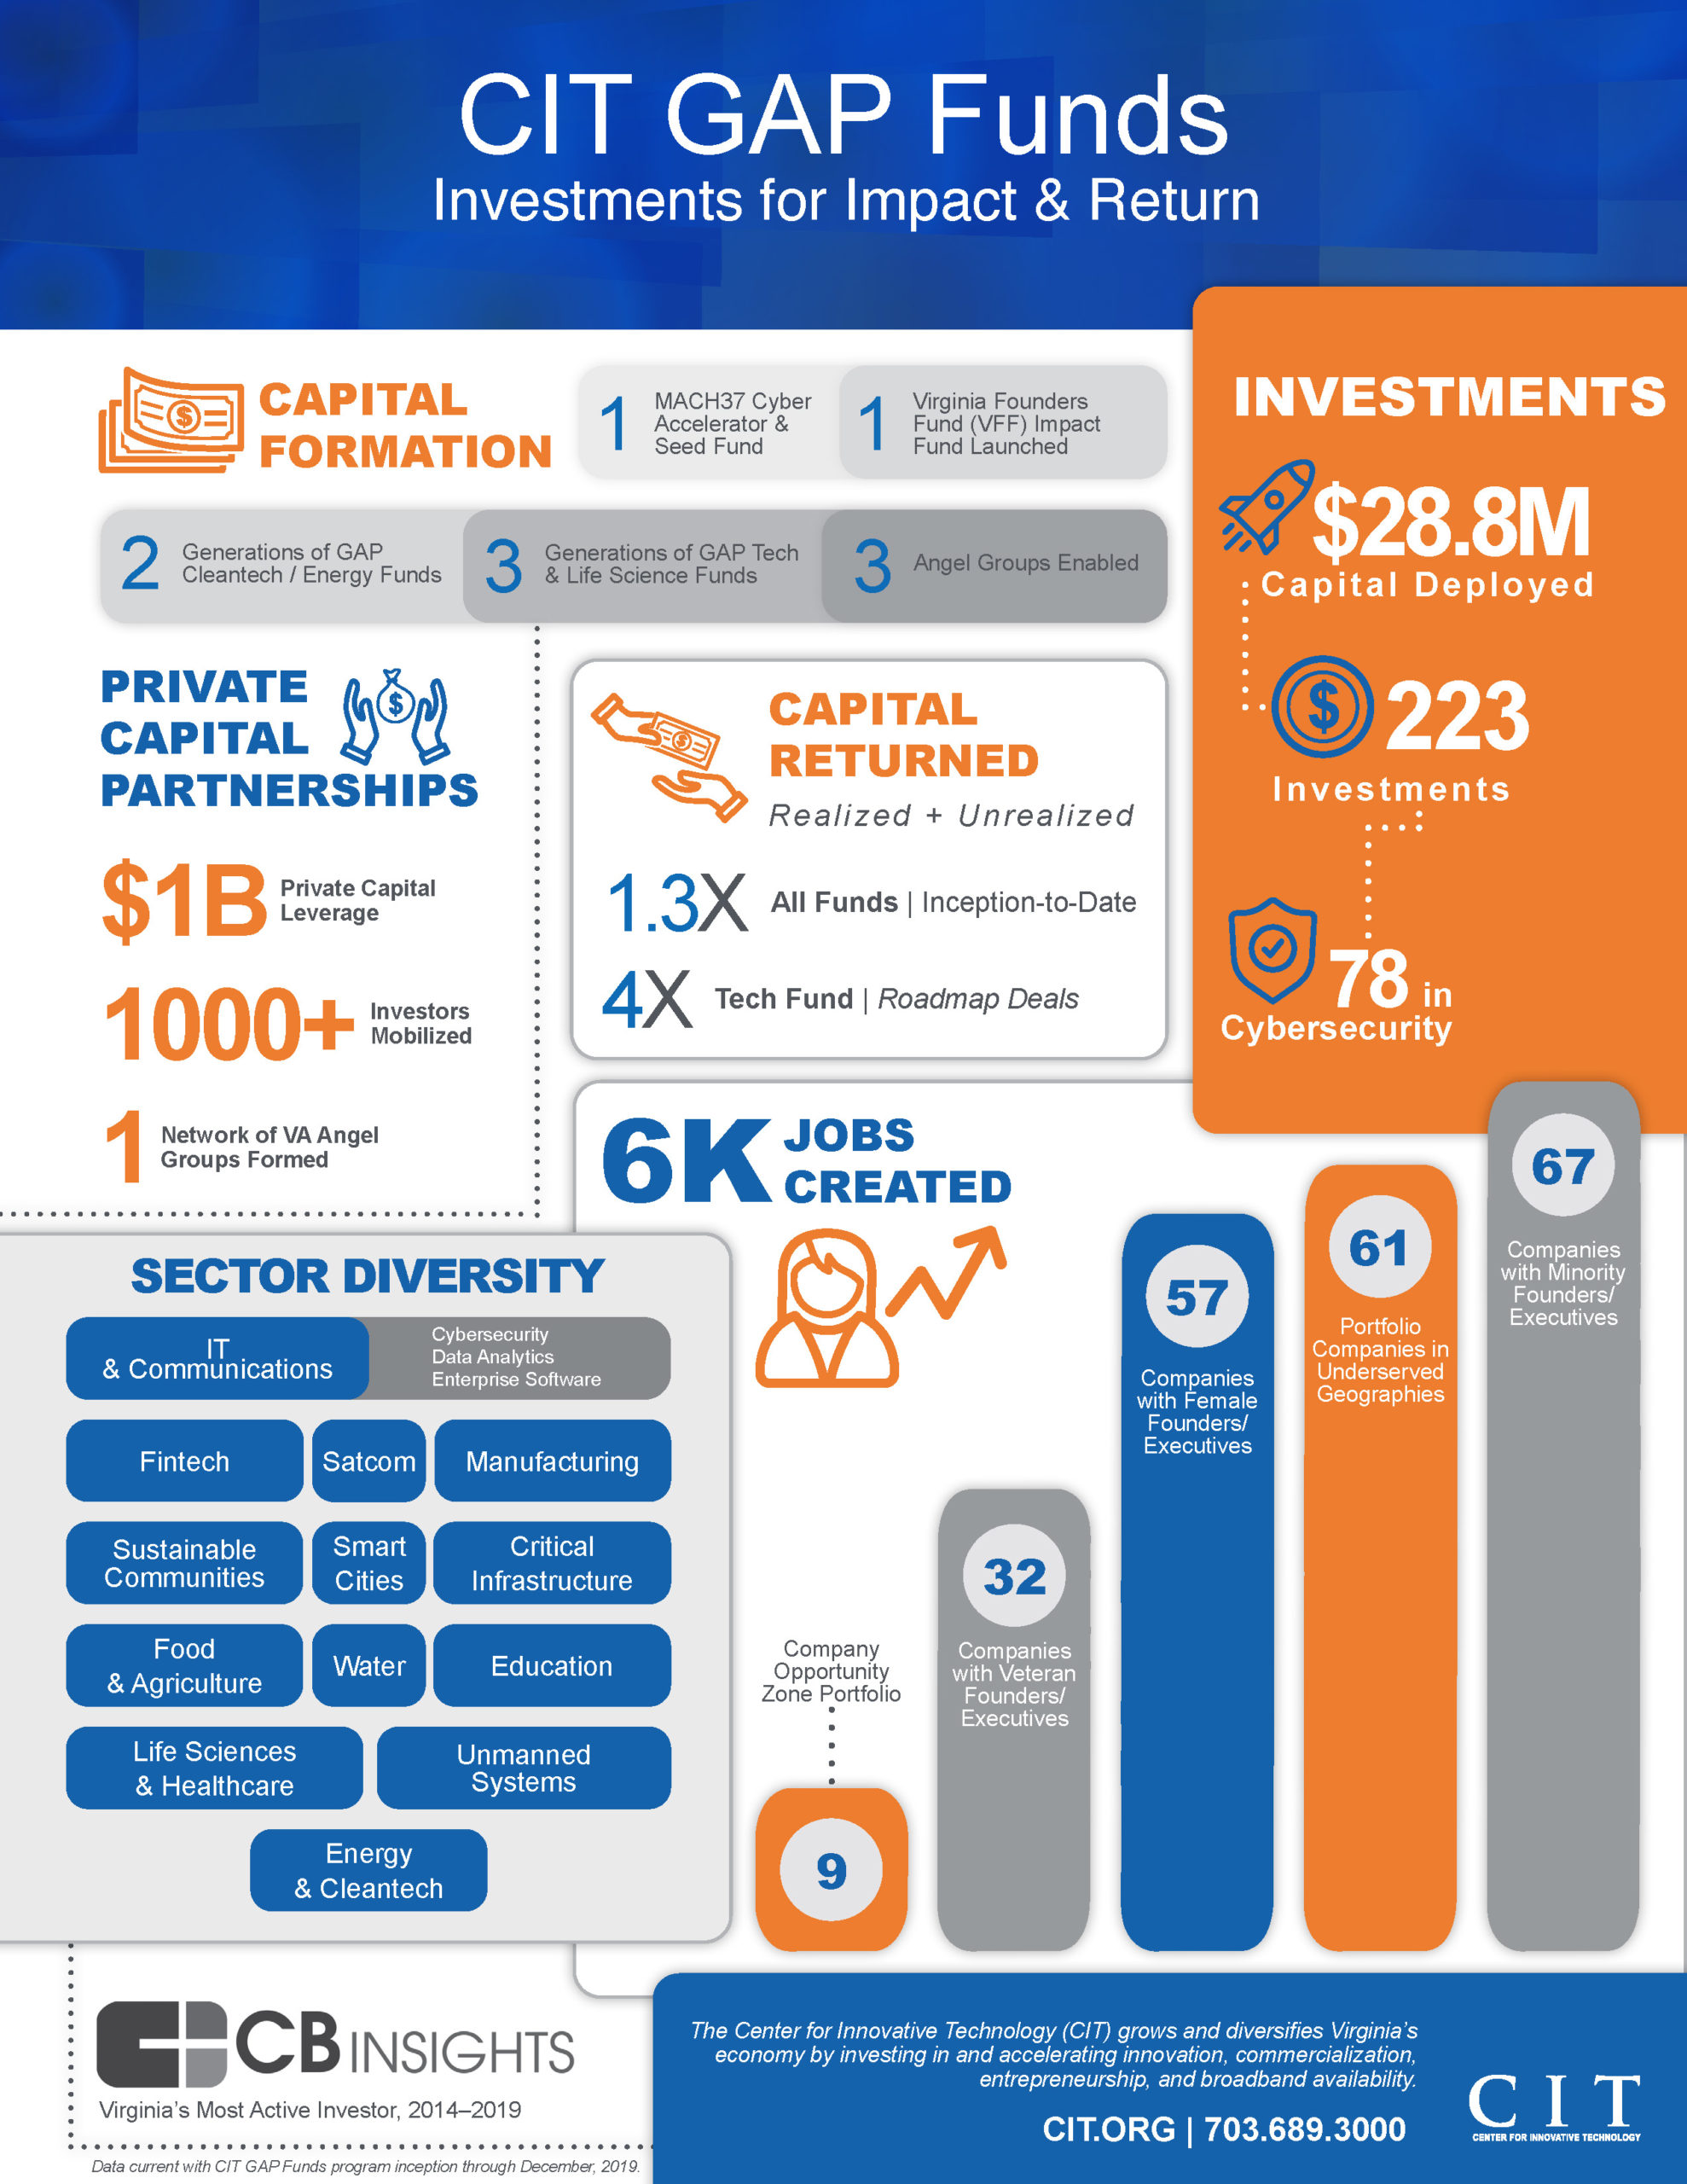 CIT GAP Funds 2019 Impact Report Showcases $28.8 Million in Capital Deployed to Date